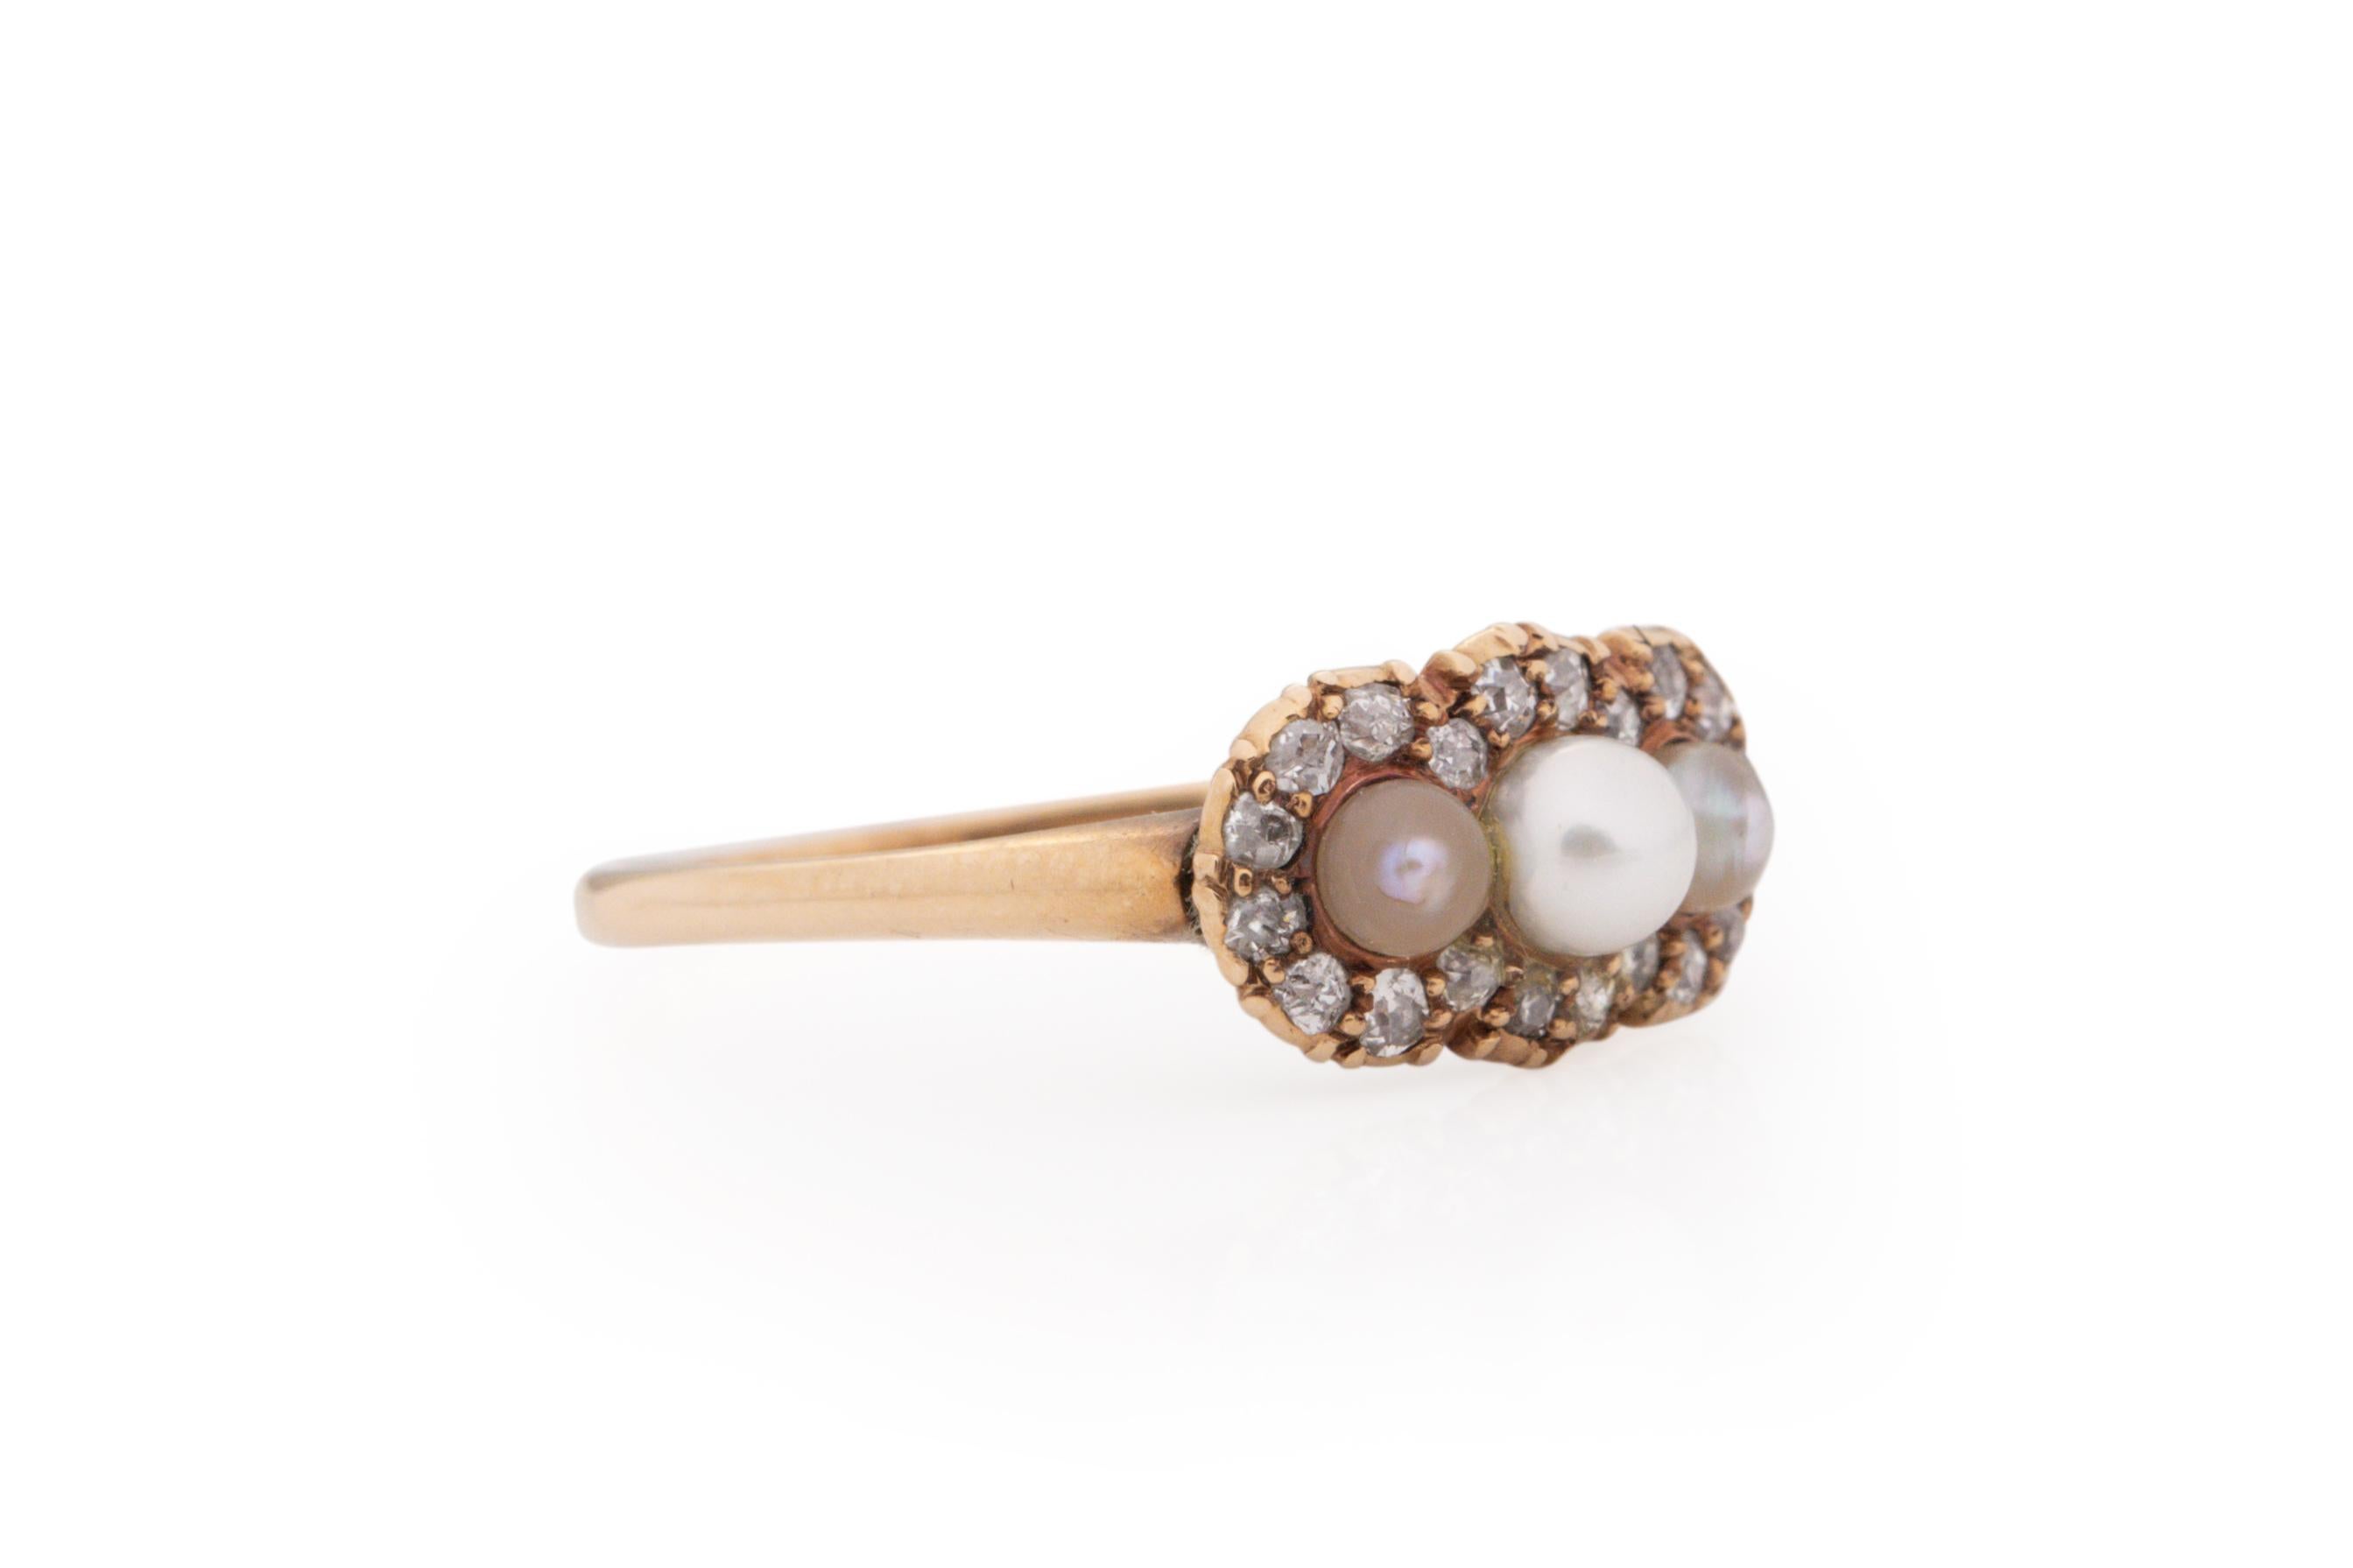 Ring Size: 8
Metal Type: 14 Karat Yellow Gold [Hallmarked, and Tested]
Weight: 2.0 grams

Center Details:
Pearls, Natural
.75 carat, total weight

Side Diamond Details:
Weight: .50 carat total weight
Cut: Antique European Cut
Color: J/K
Clarity: